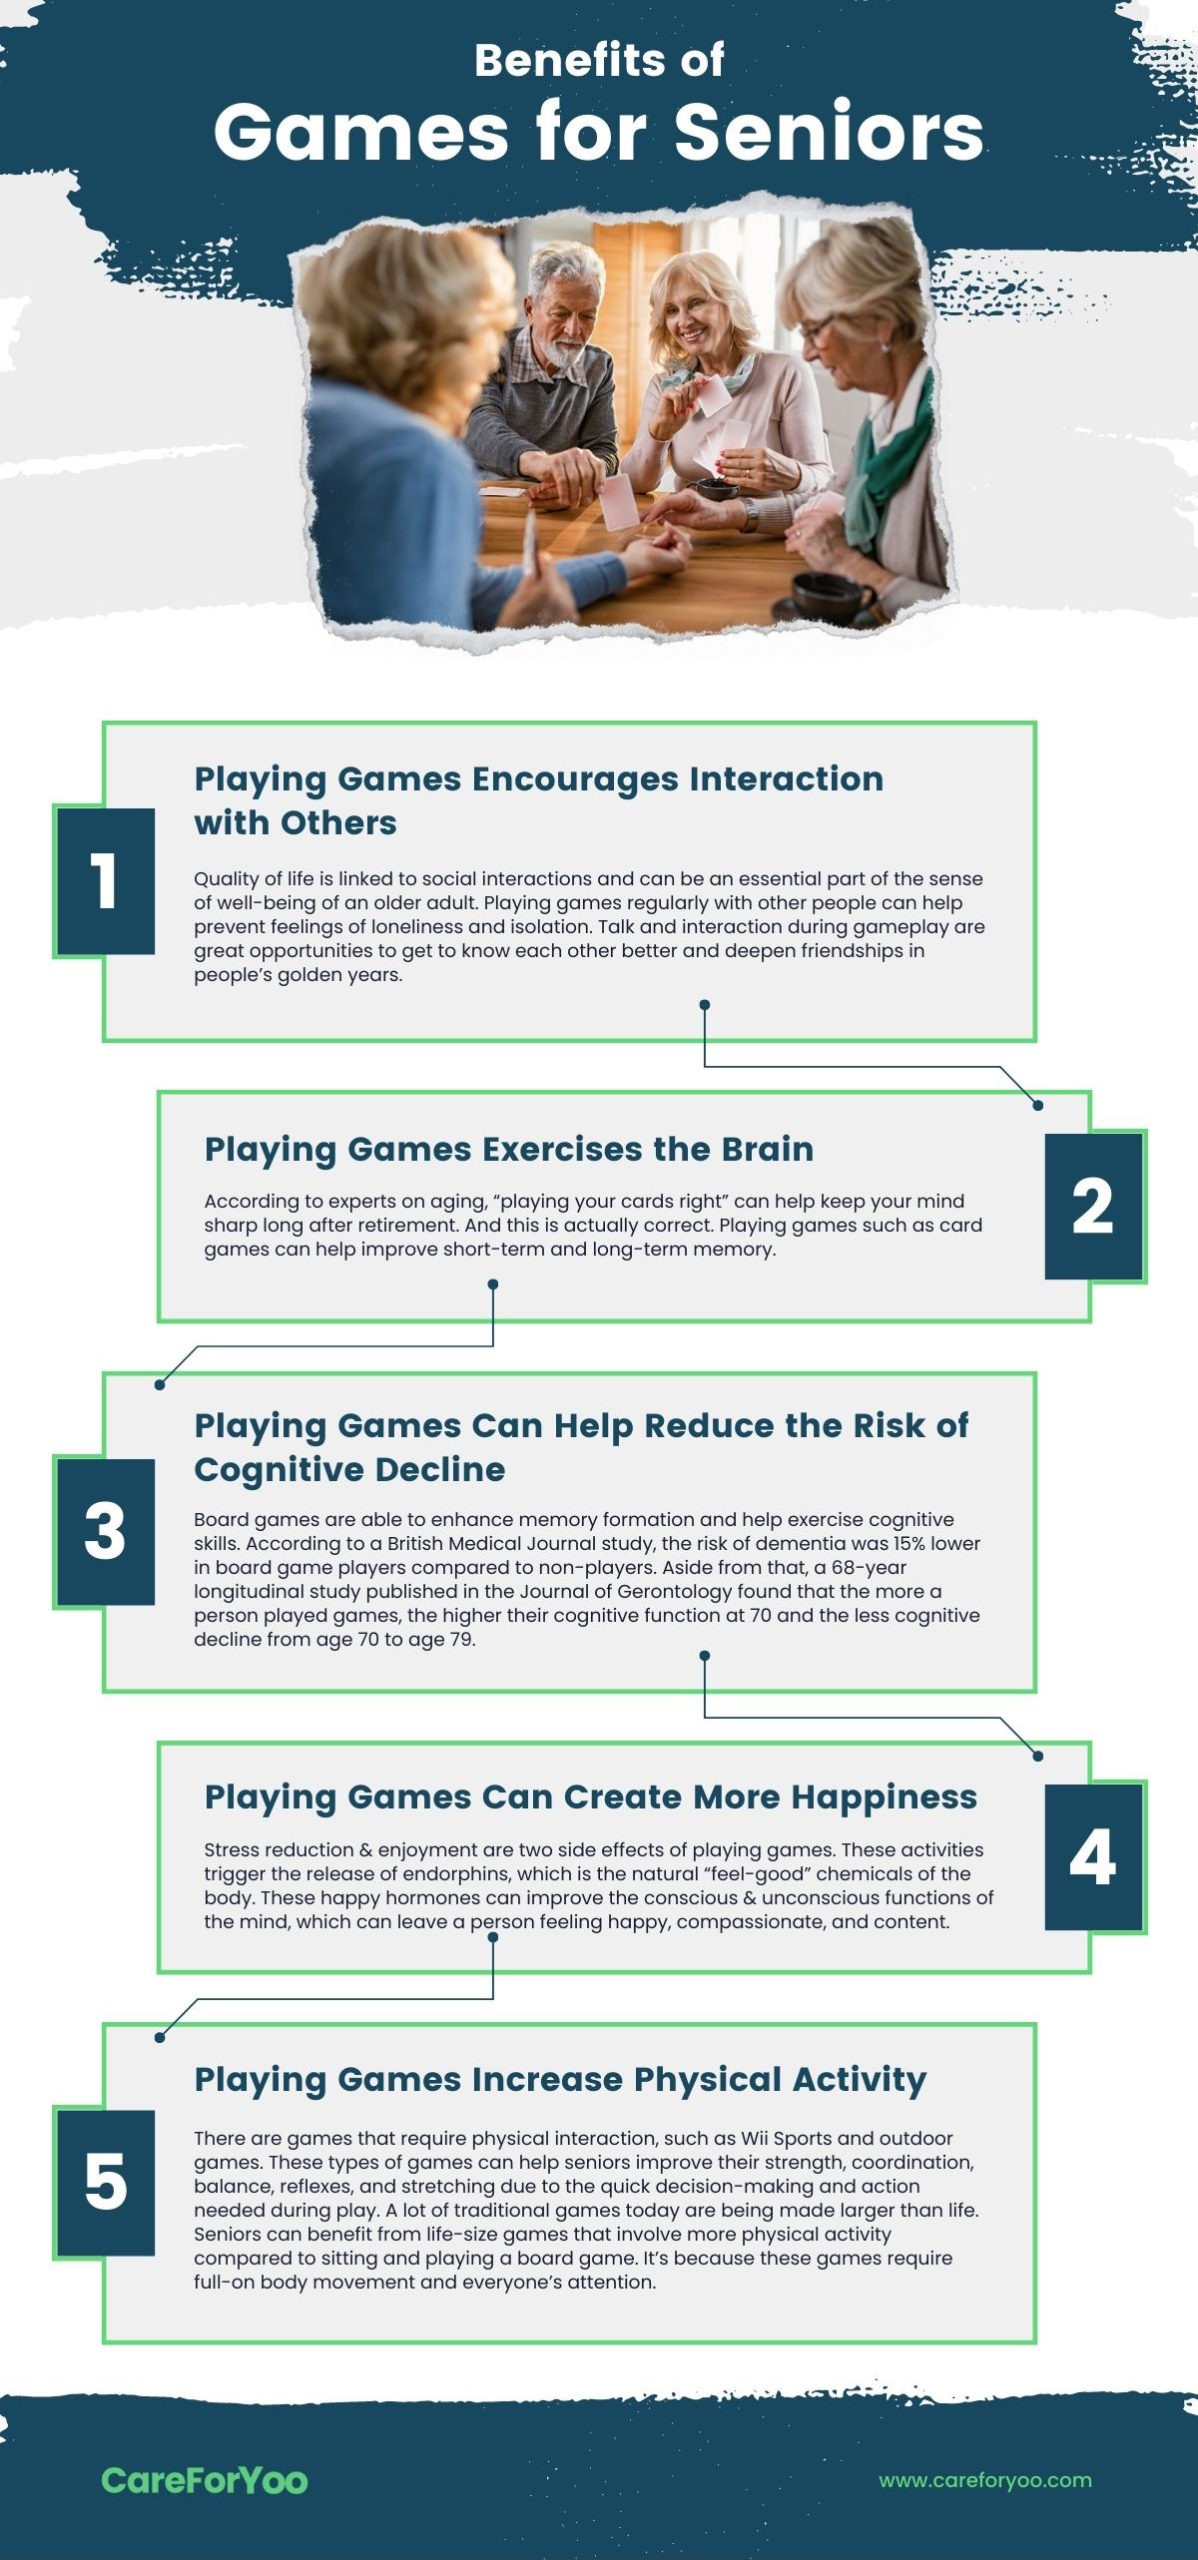 Benefits of Games for Seniors